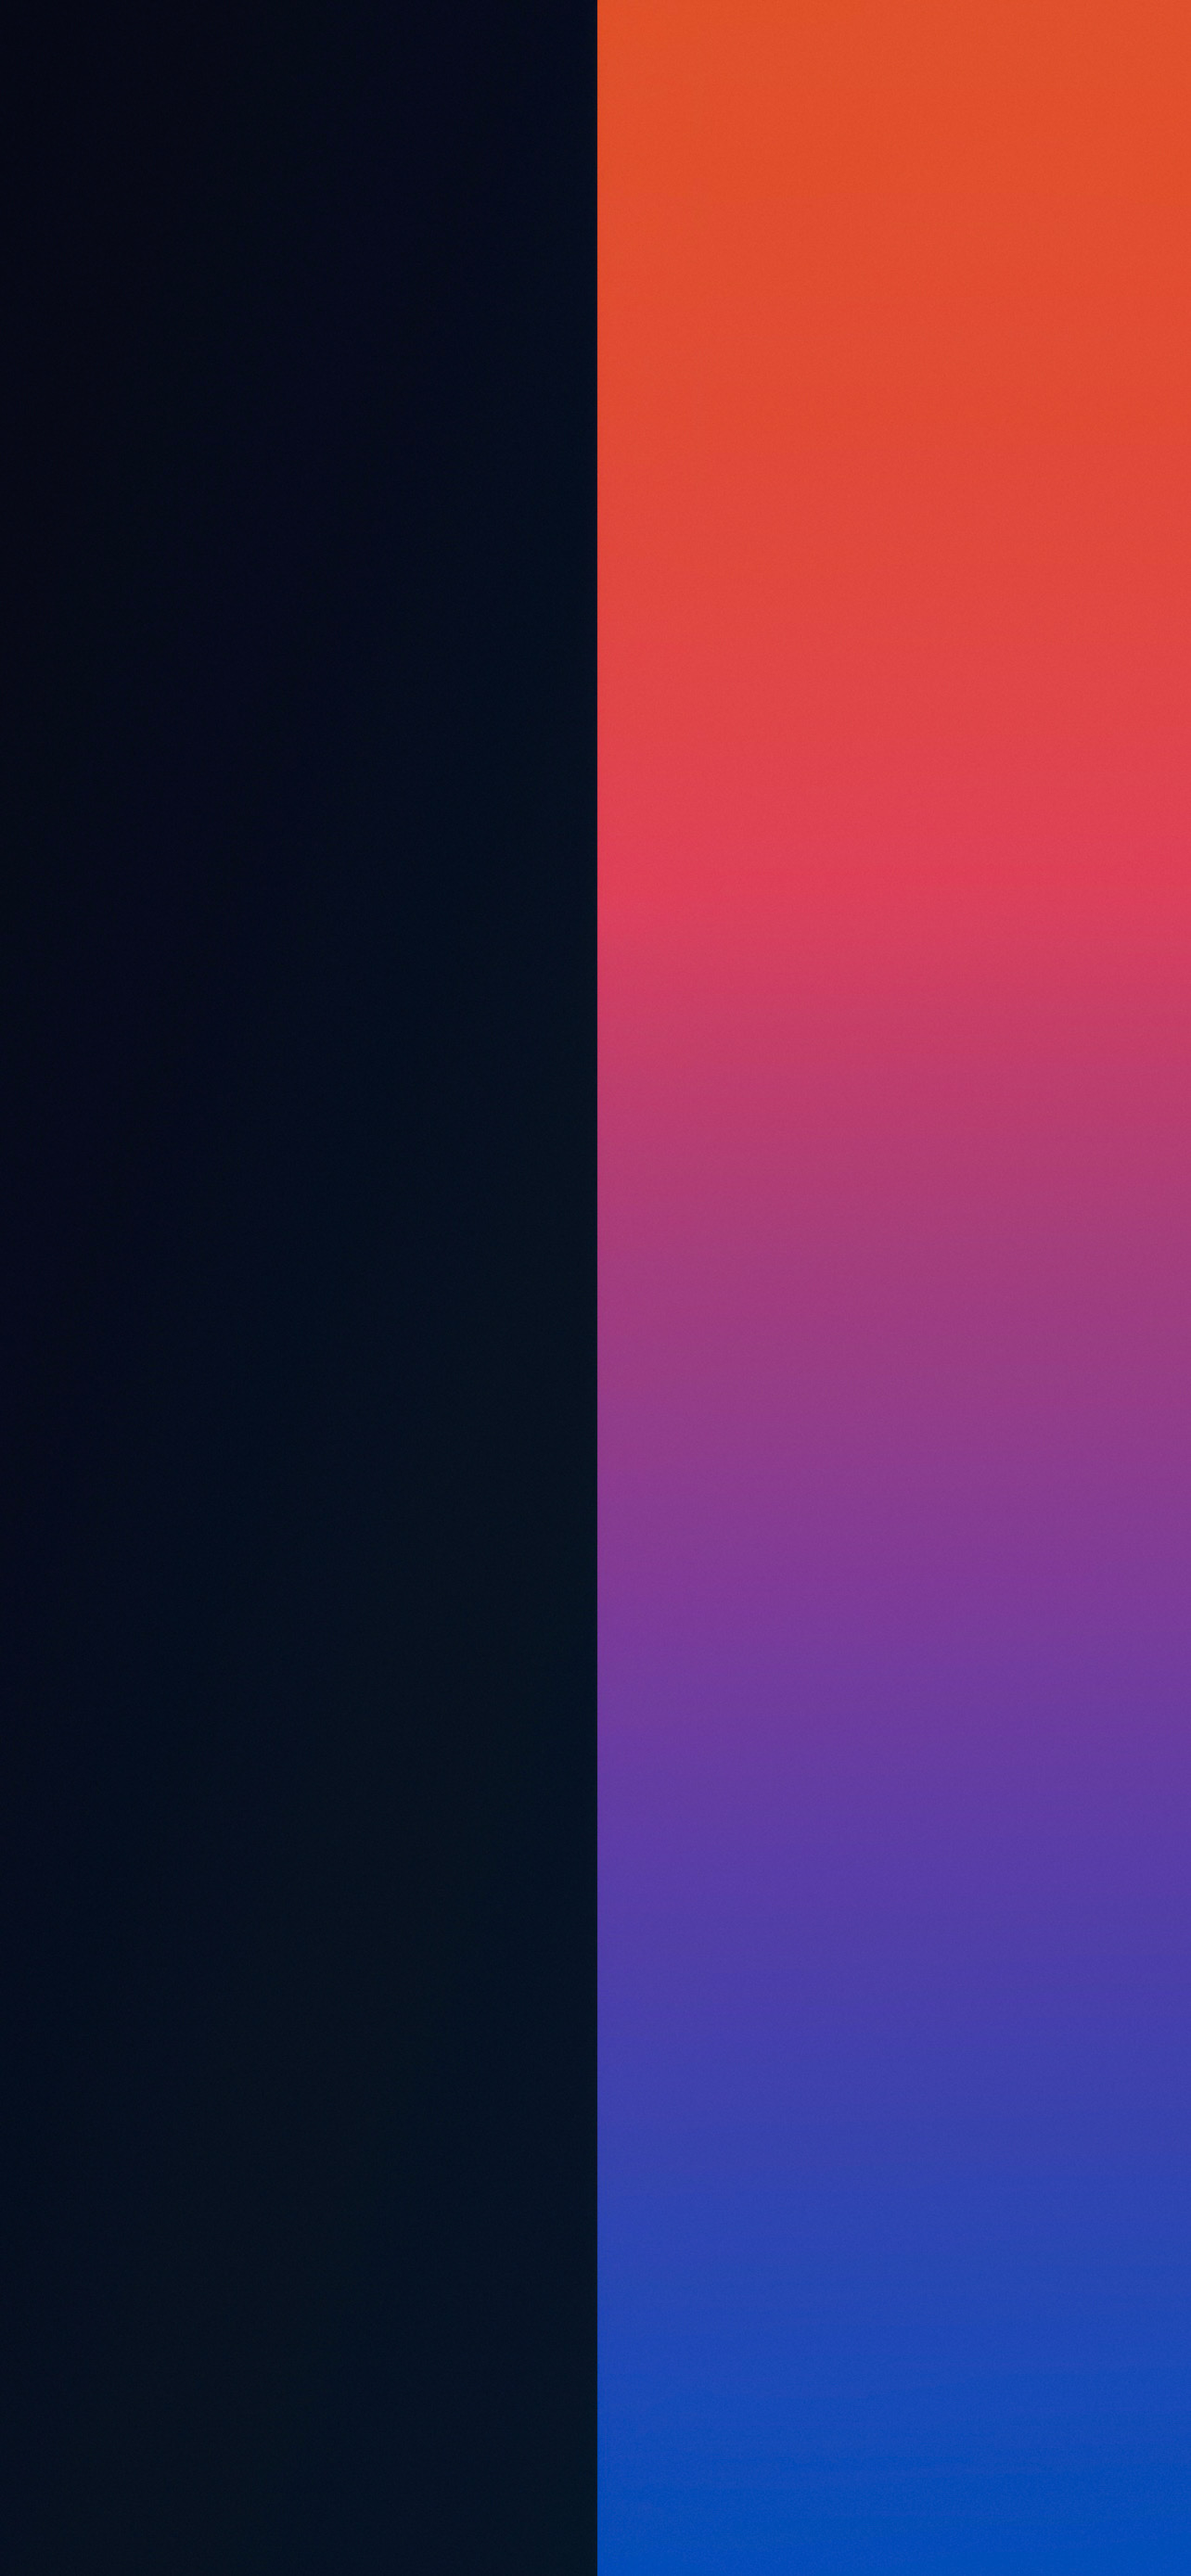 Duo iPhone wallpaper with split colors